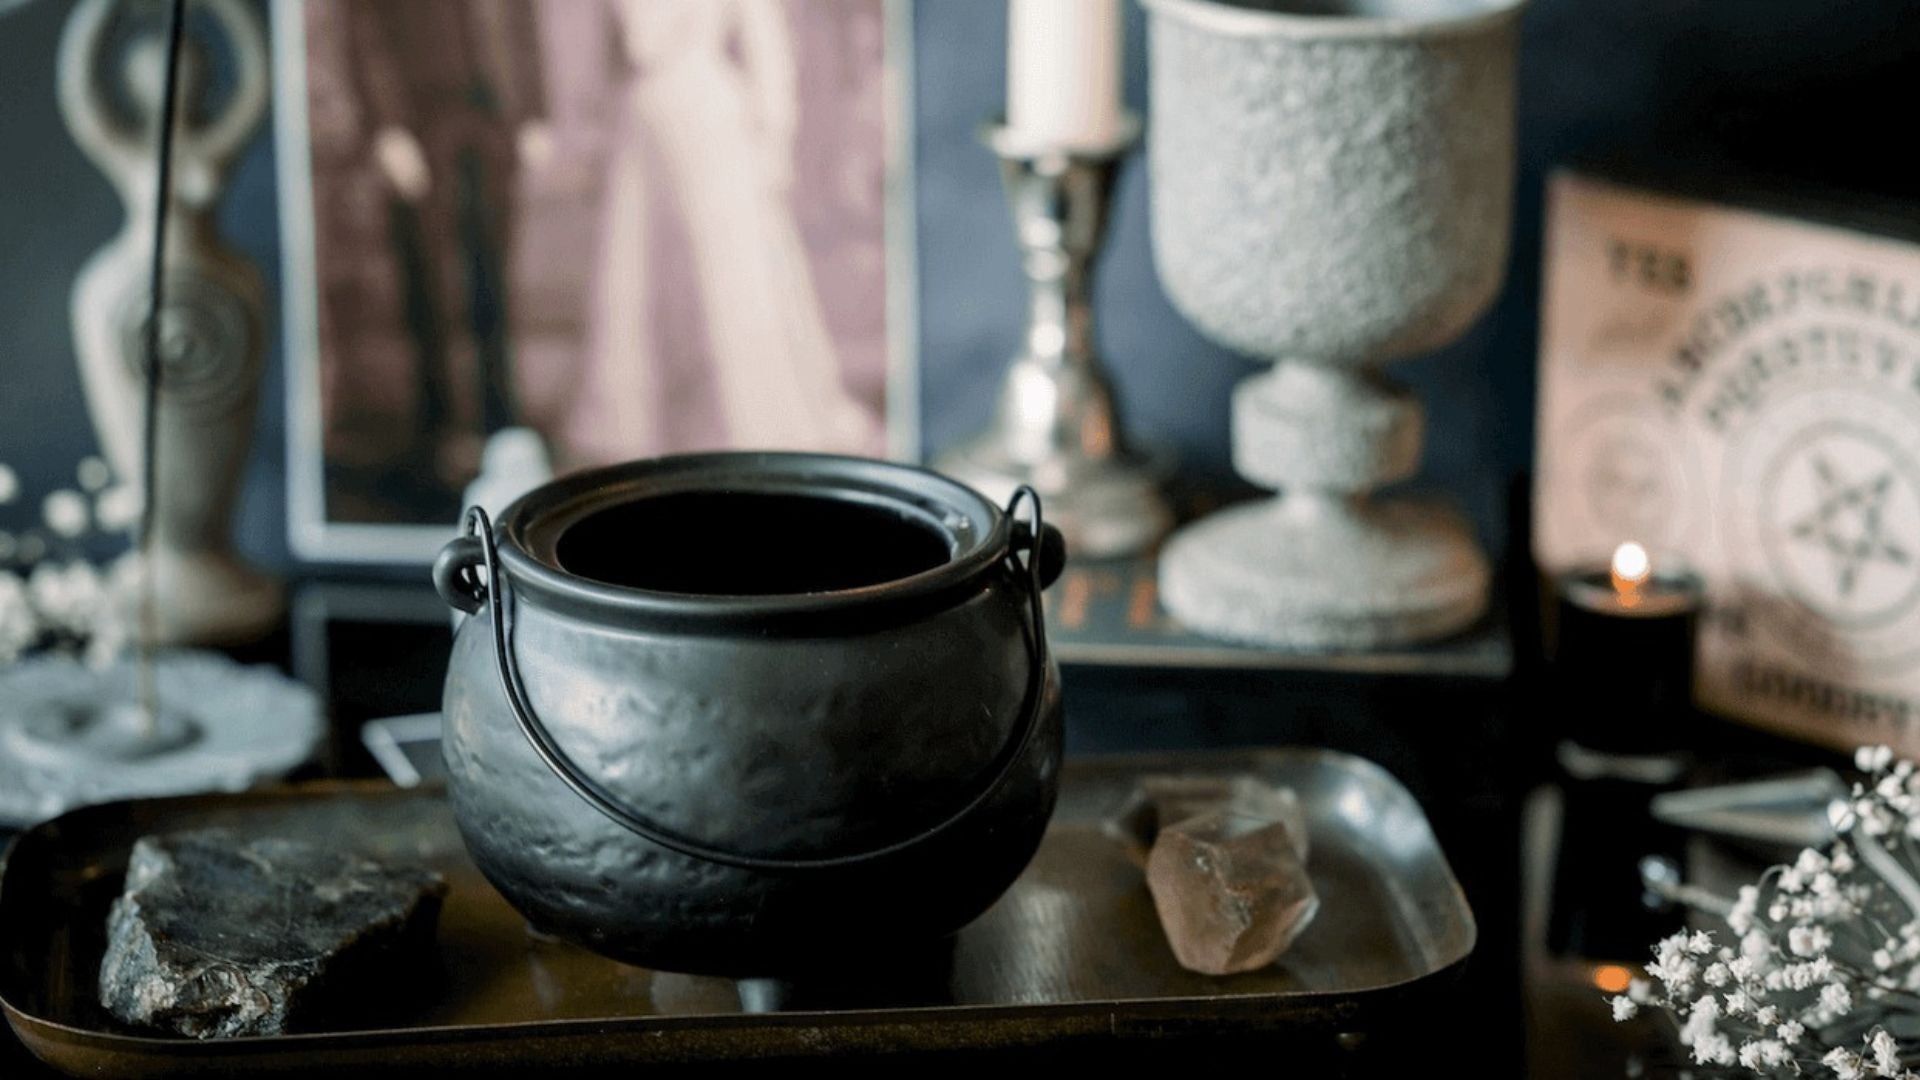 A collection of witchy accessories: a small cauldron, crystals, and candles